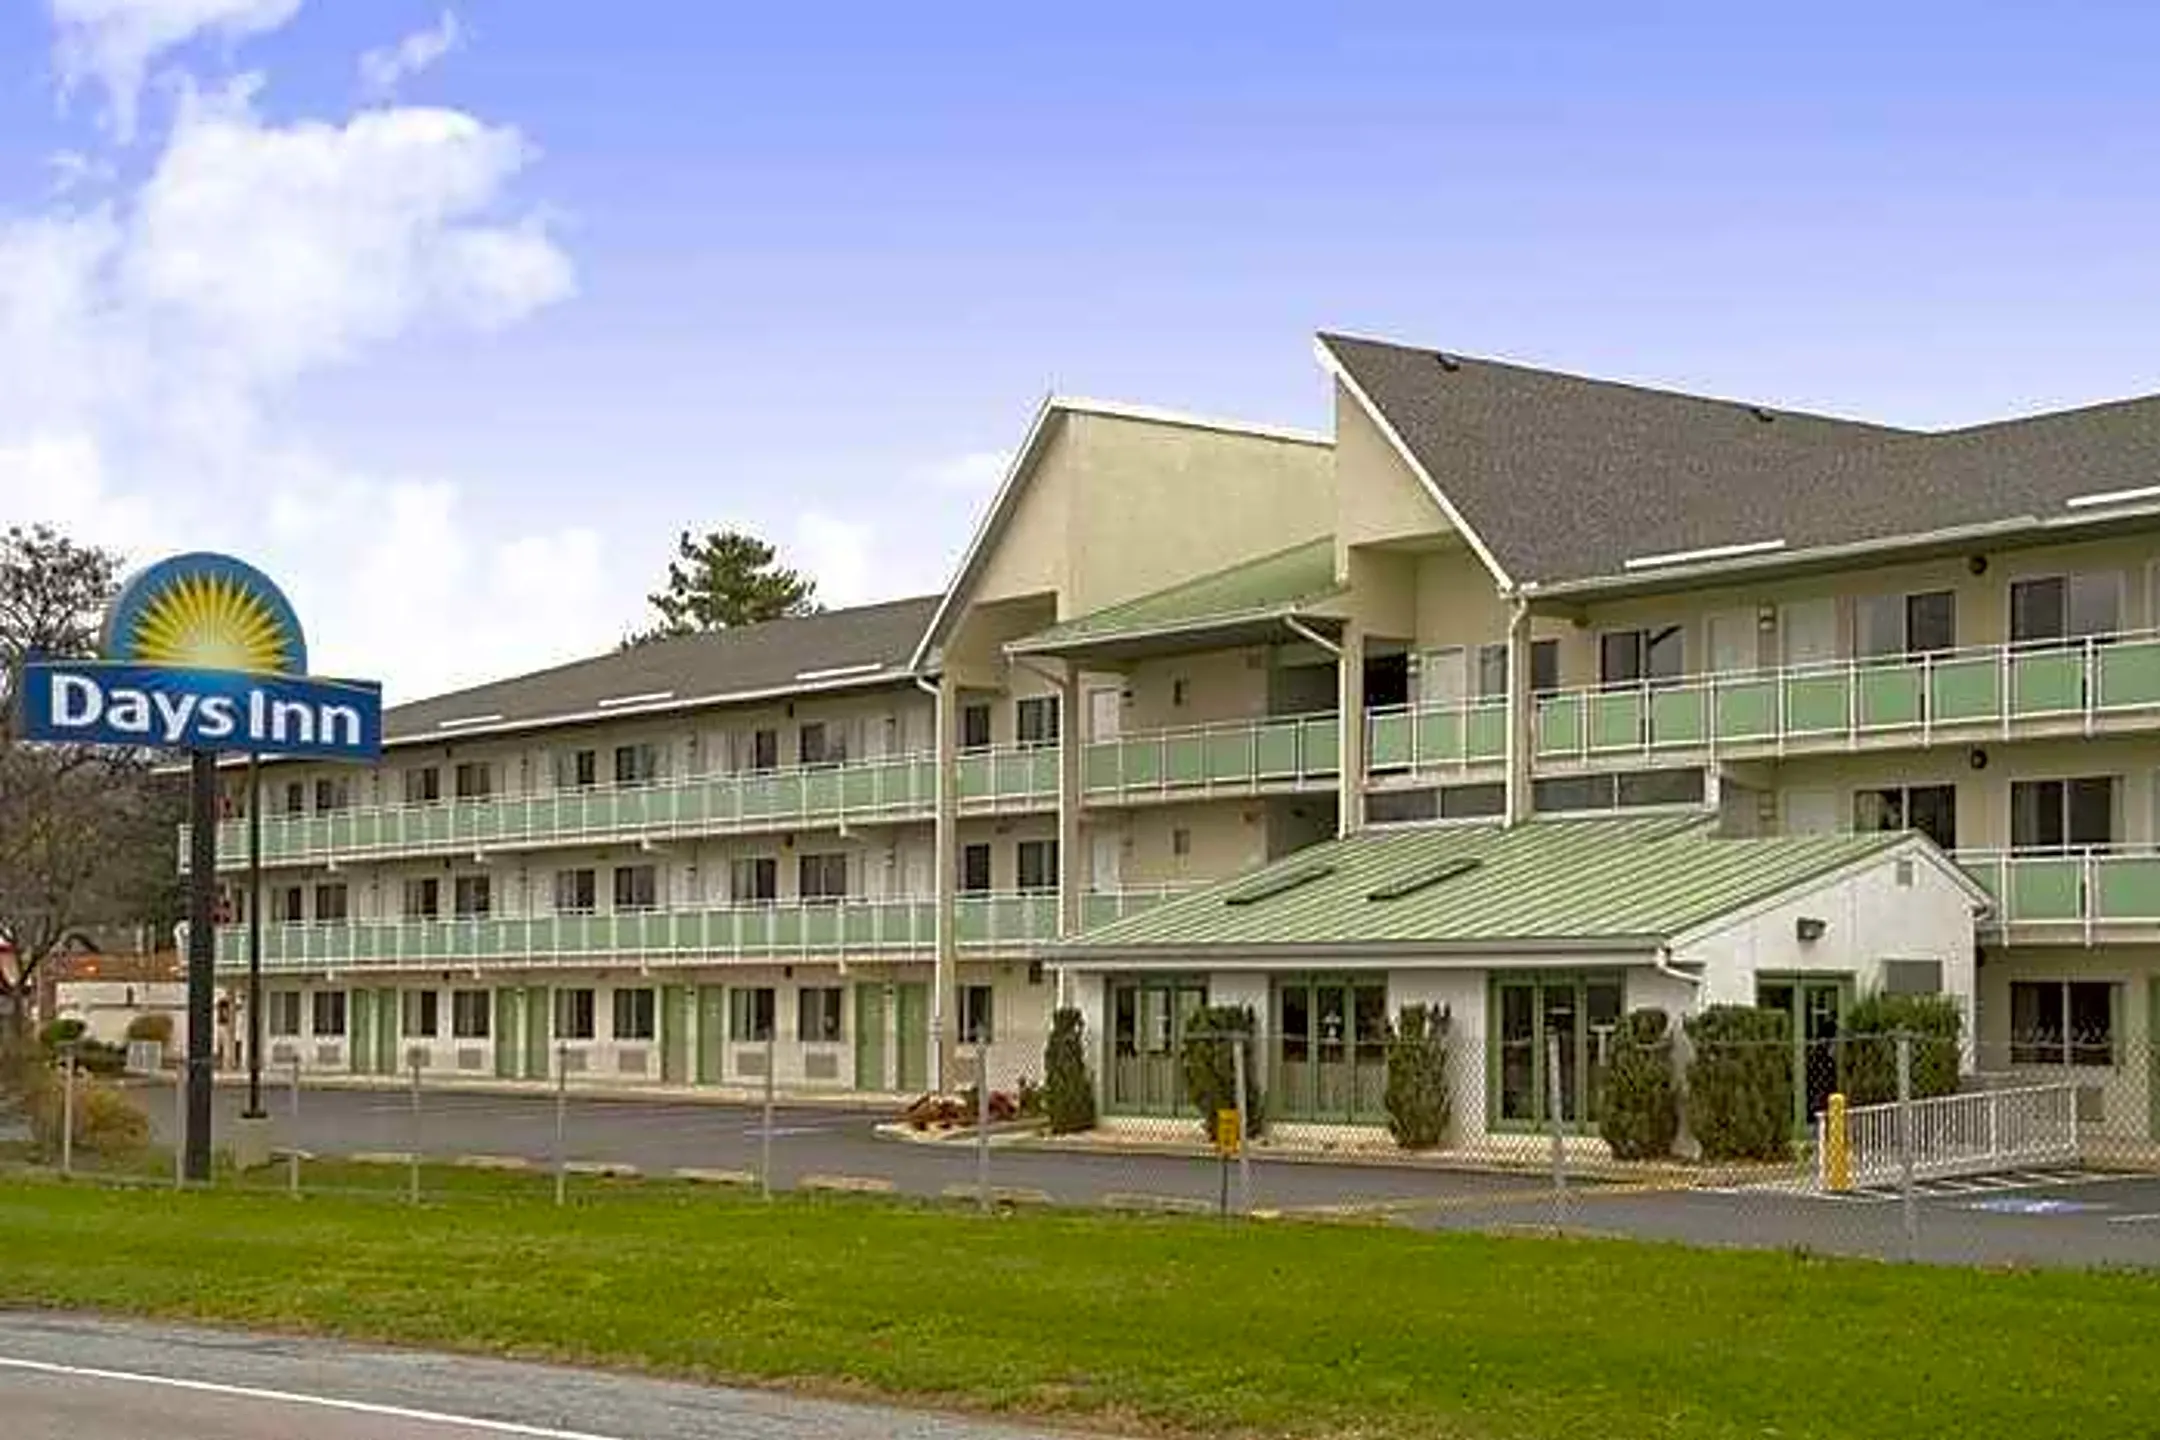 Building - Days Inn - North Extended Stay Studio - Harrisburg, PA